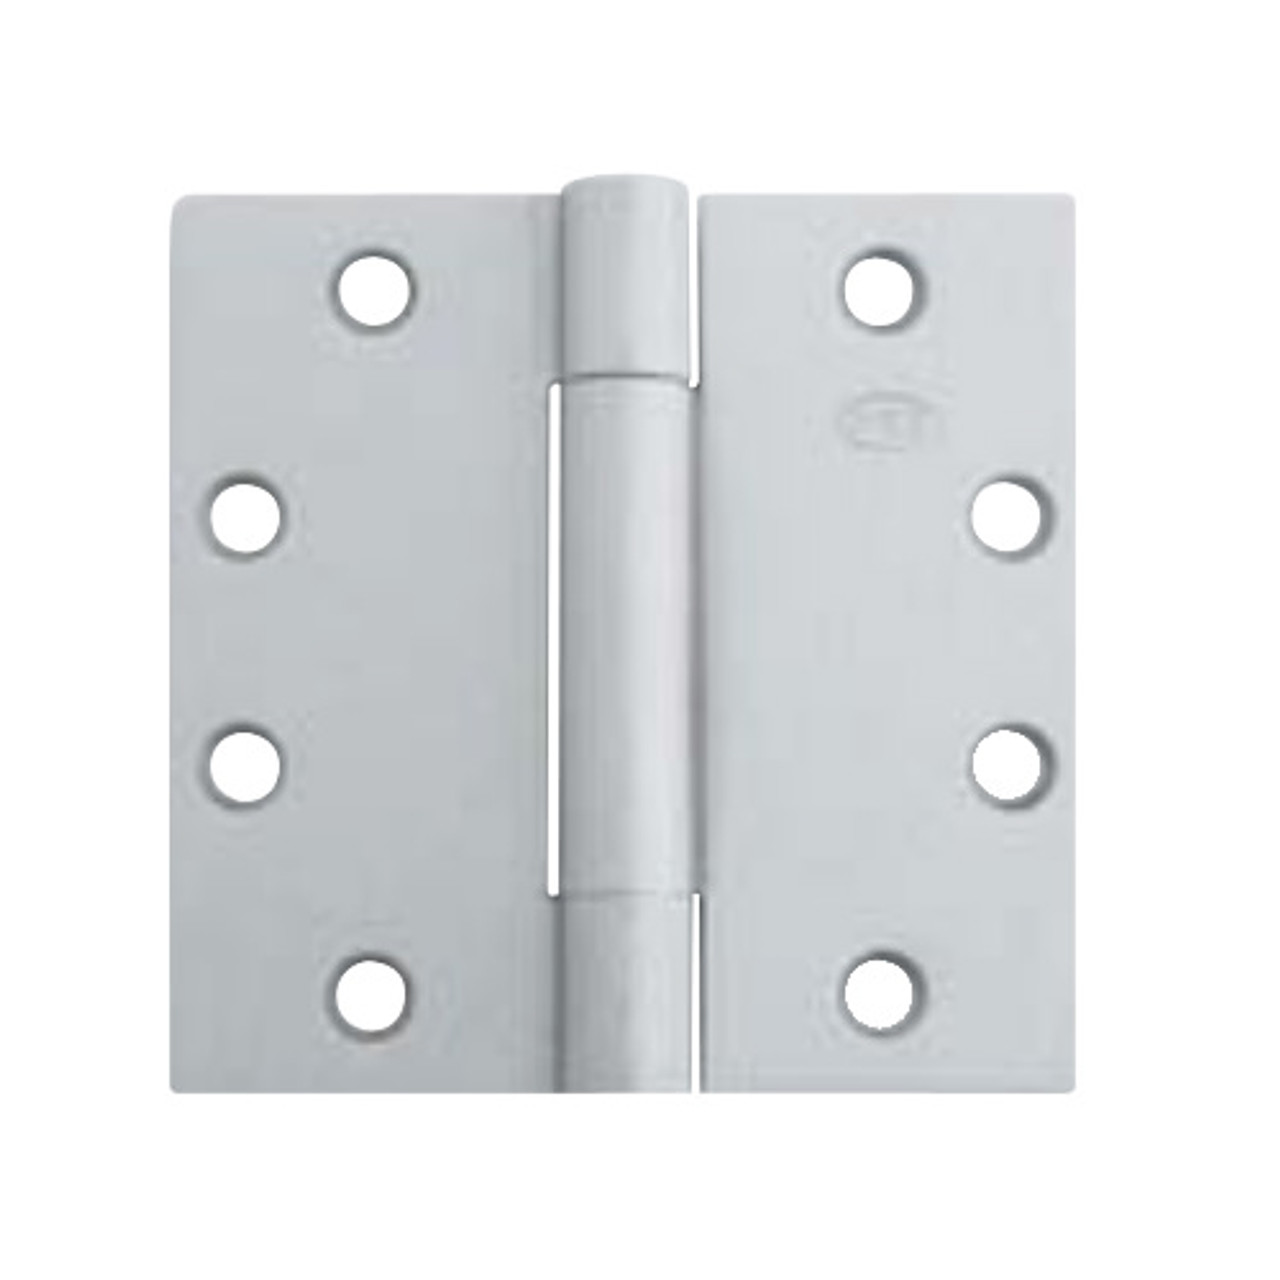 3CB1WT-5x6-600 IVES 3 Knuckle Concealed Bearing Full Mortise Wide Throw Butt Hinge in Primed for Paint - Steel